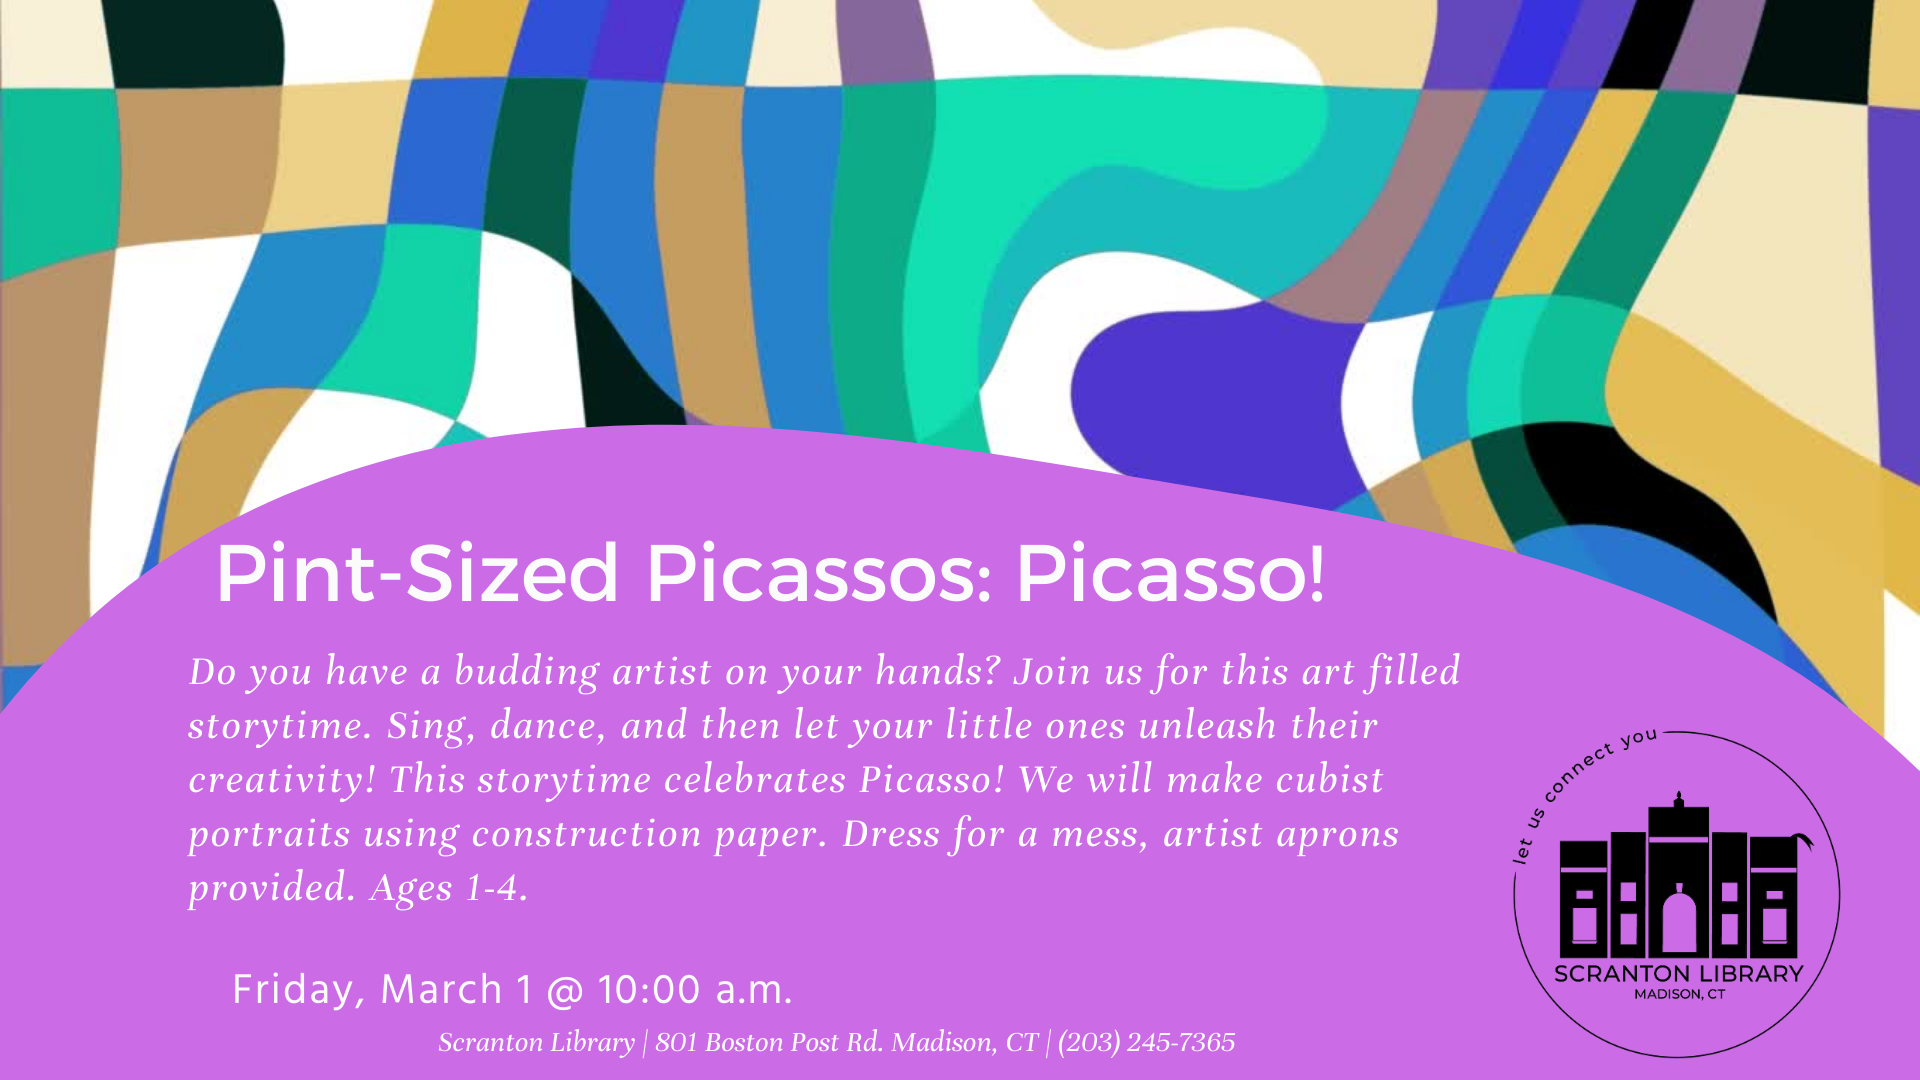 Pint Sized Picassos: Picasso!